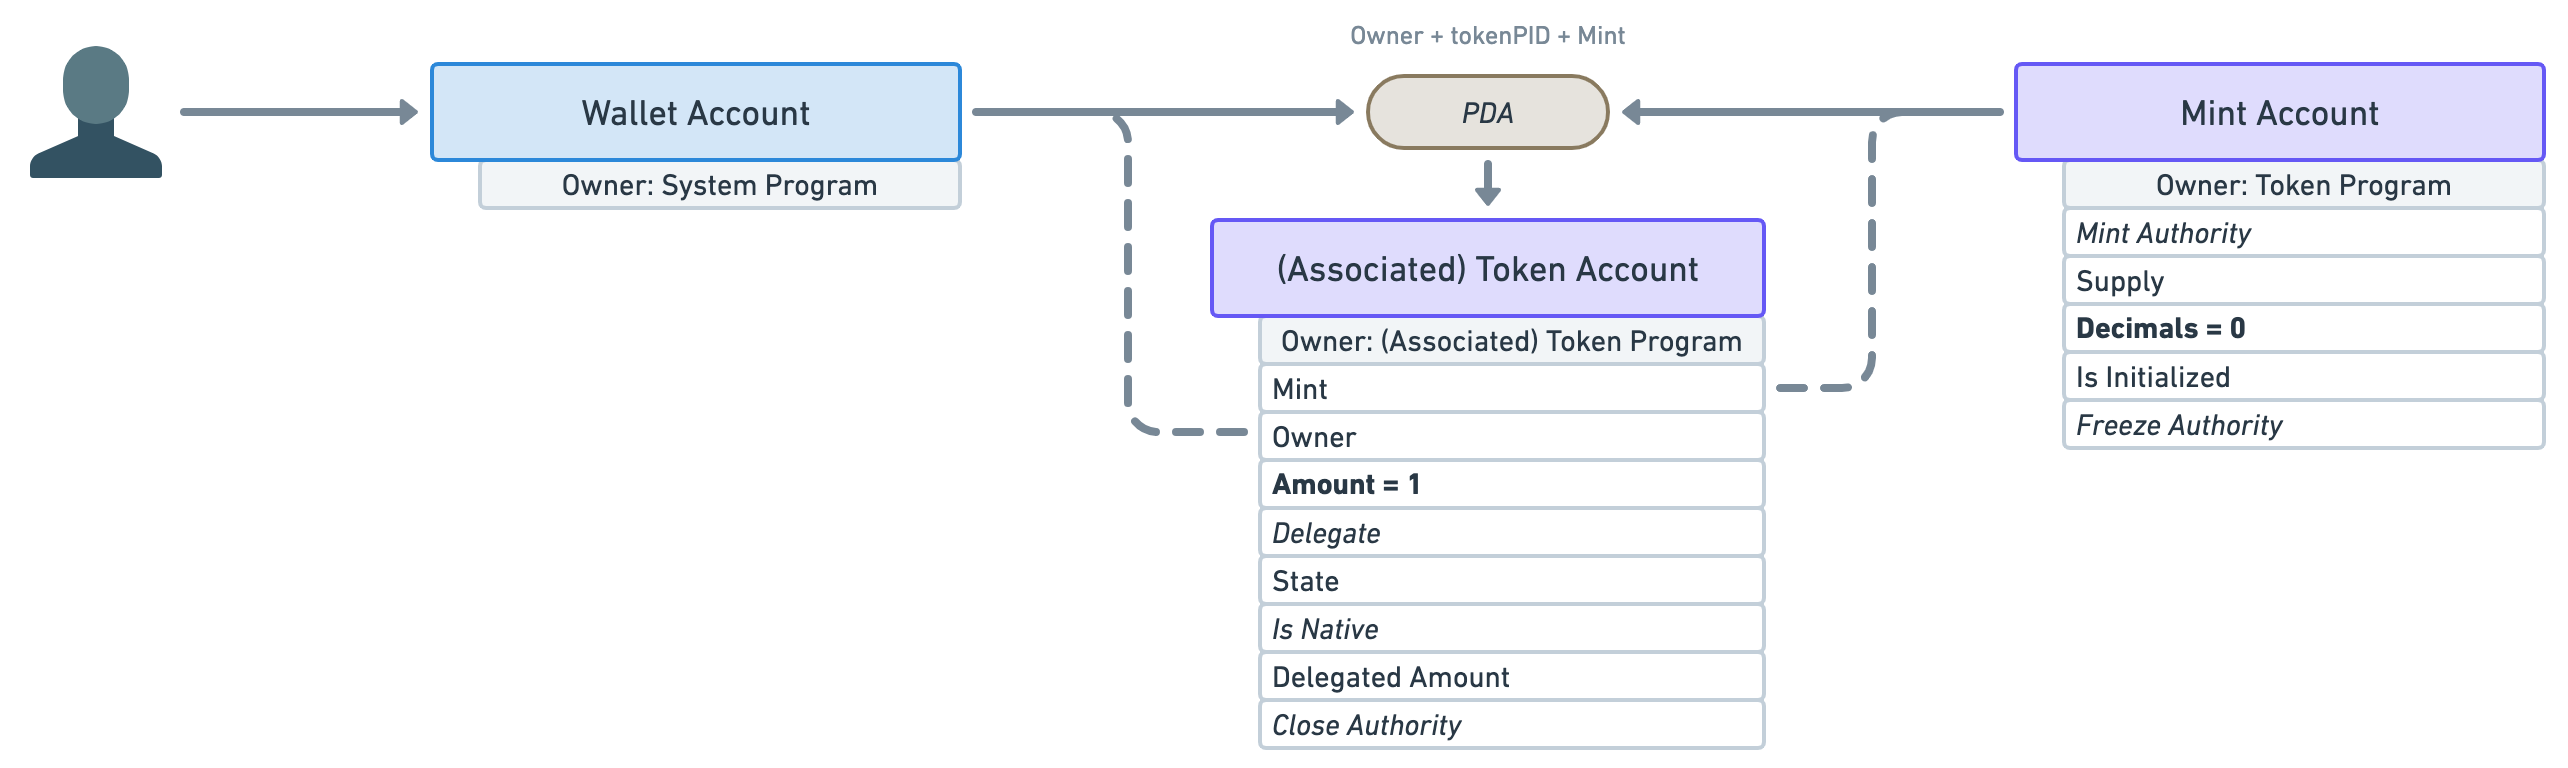 Same as the previous diagram but “Amount” became “Amount = 1” on the token account and “Decimals” became “Decimals = 0” on the mint account. Both the updated fields are displayed in bold.